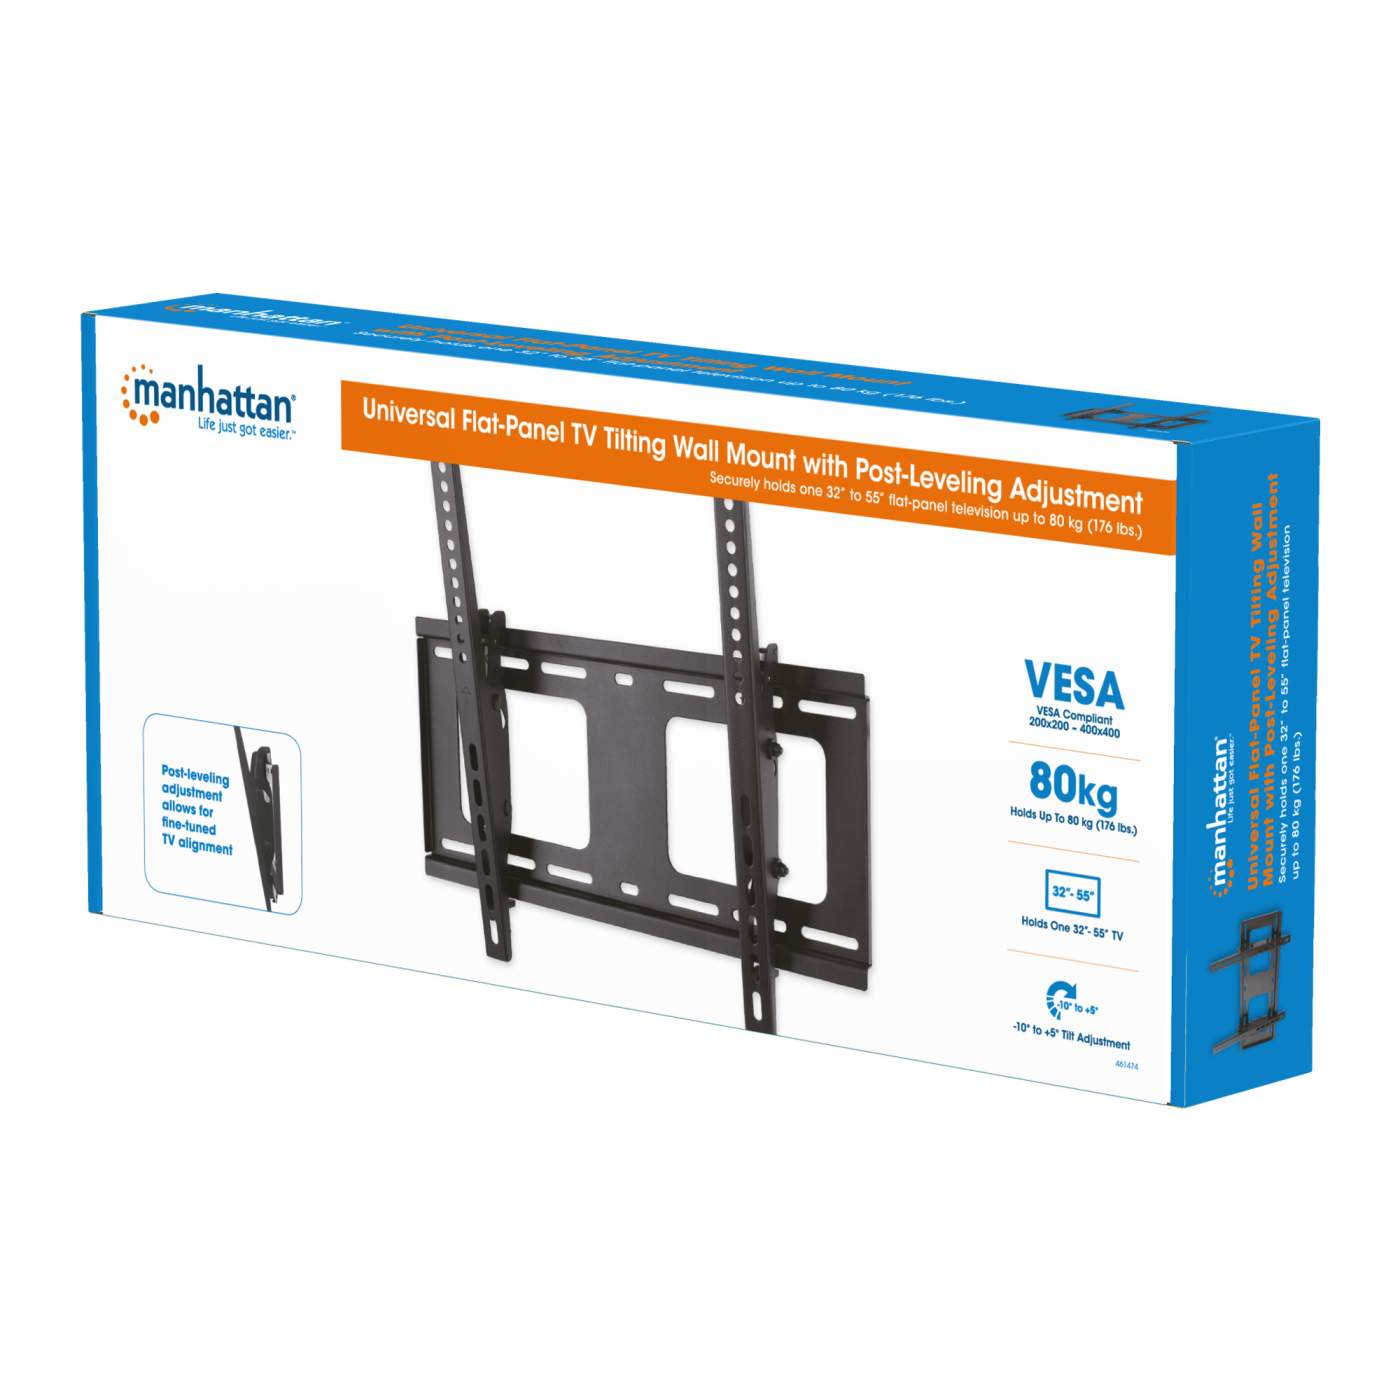 Universal Flat-Panel TV Tilting Wall Mount with Post-Leveling Adjustment Packaging Image 2